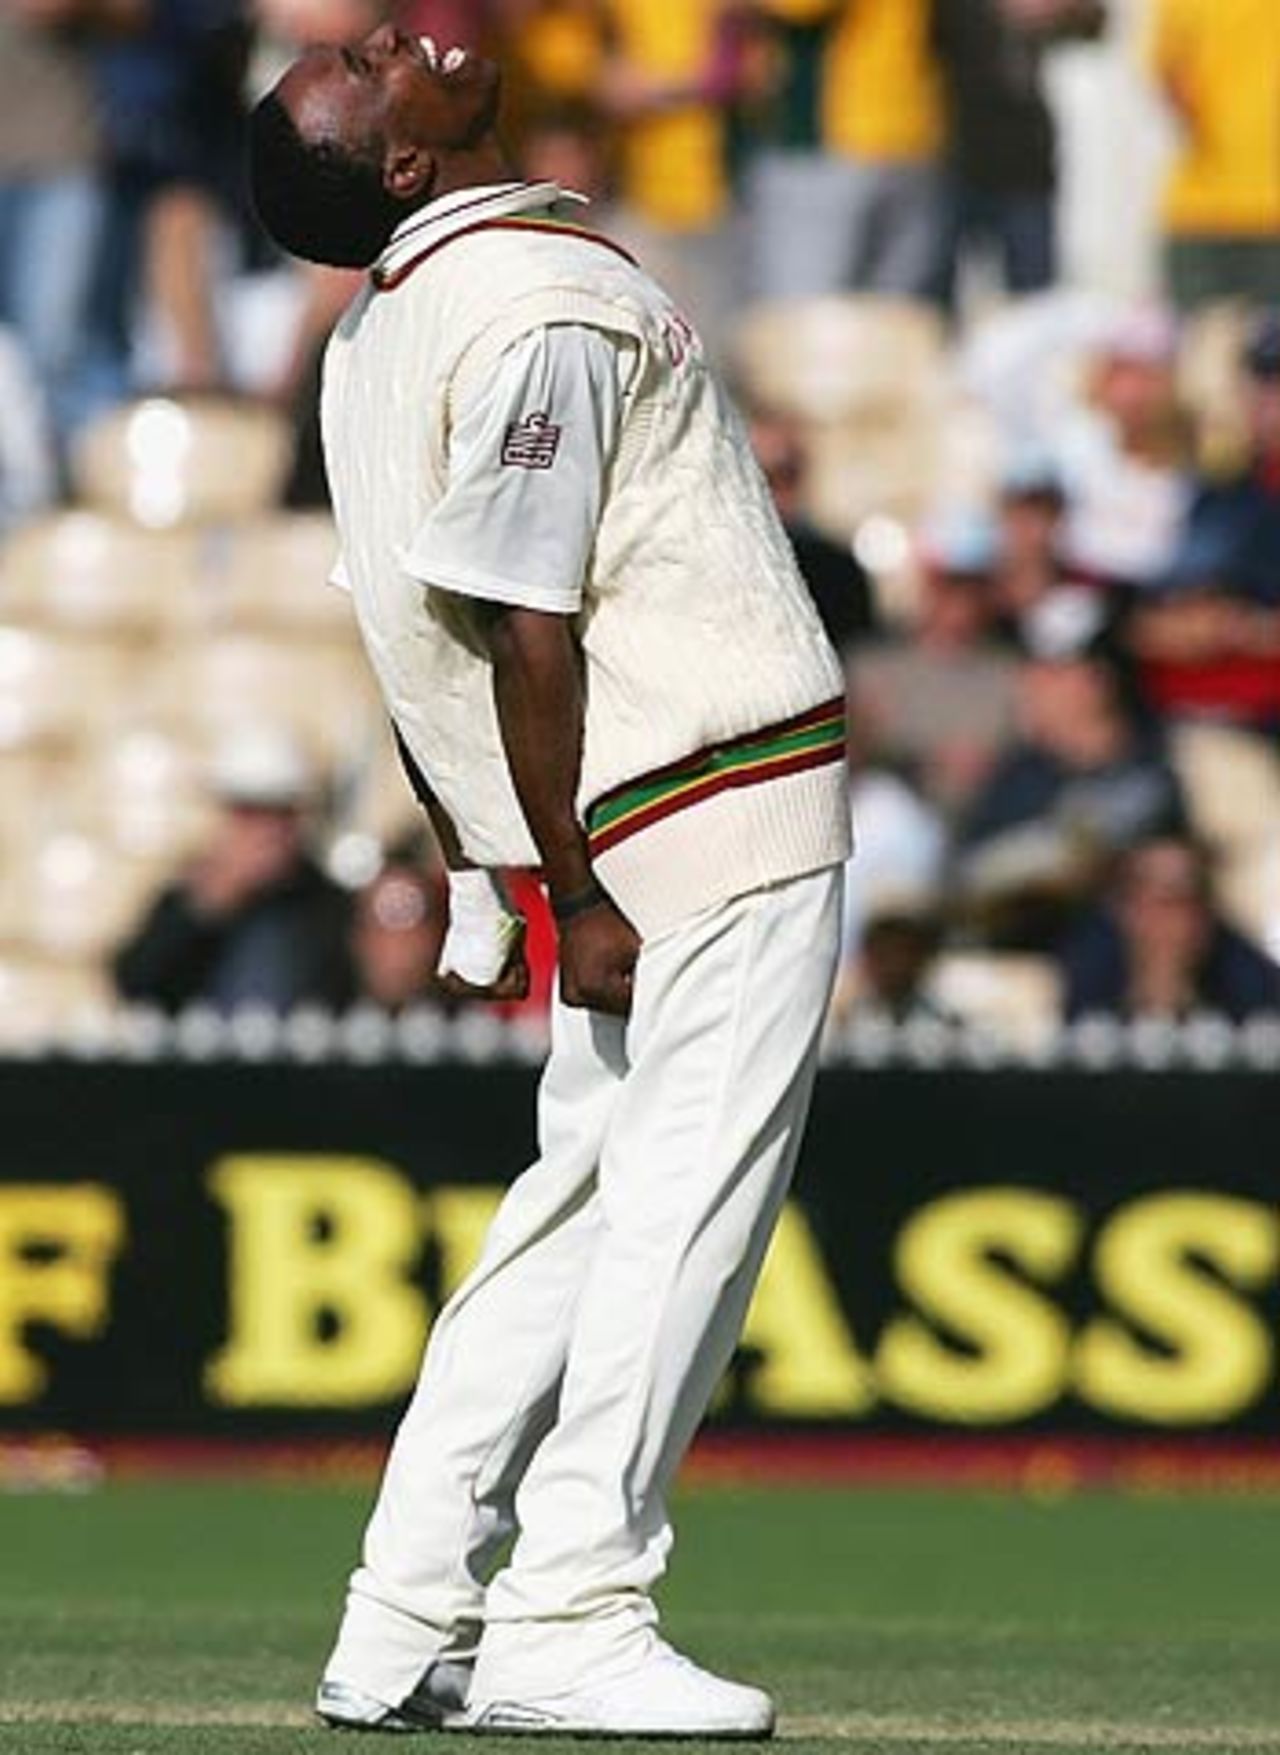 Dwayne Bravo cannot contain his elation at dismissing Ricky Ponting, Australia v West Indies, 3rd Test, Adelaide, 2nd day, November 26, 2005